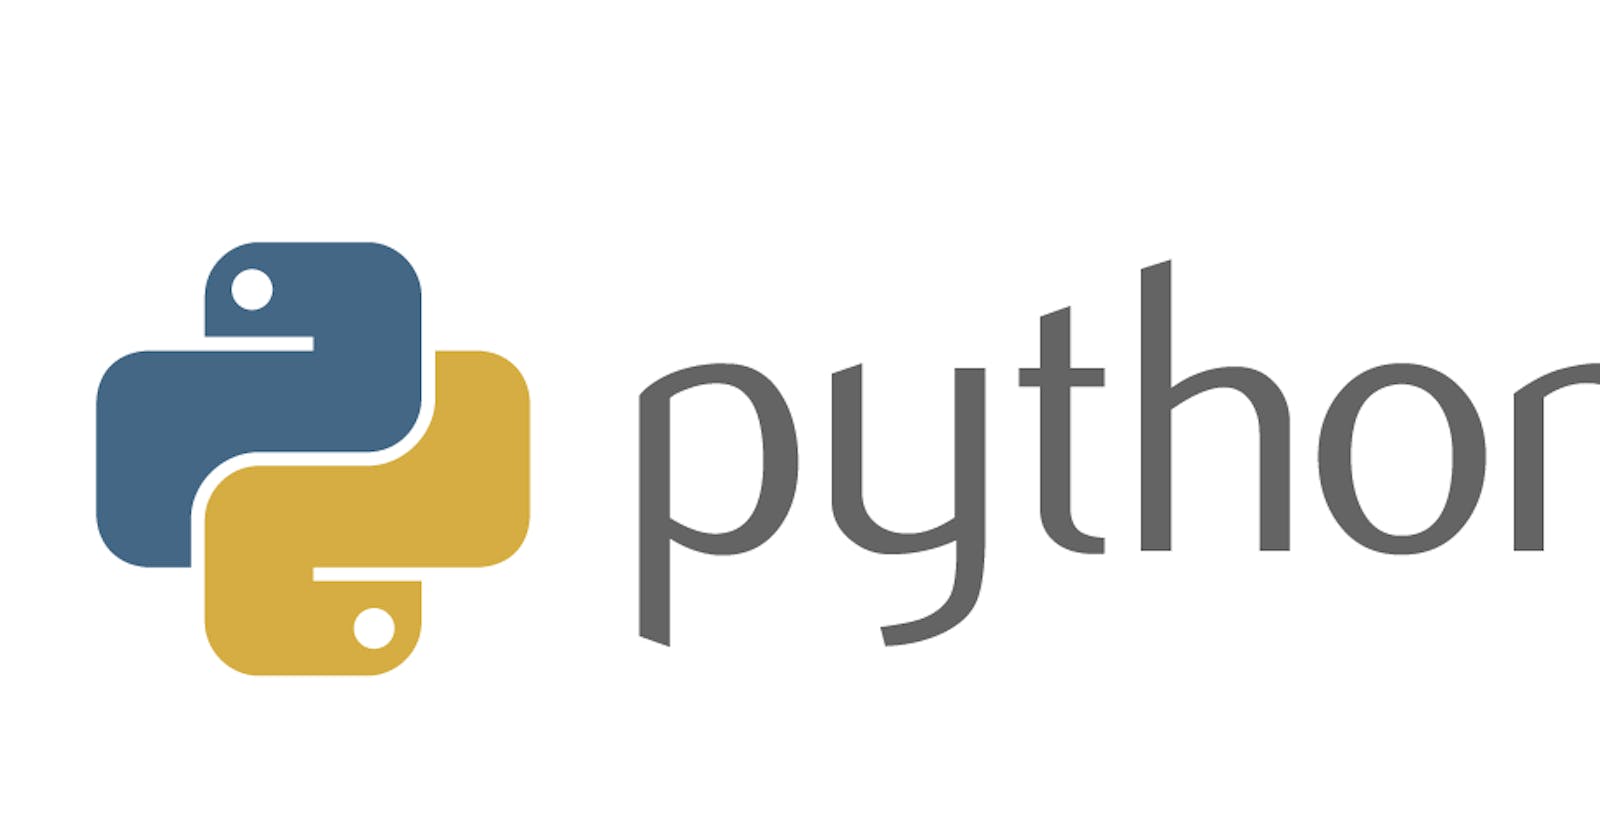 What's New In Python 3.11?